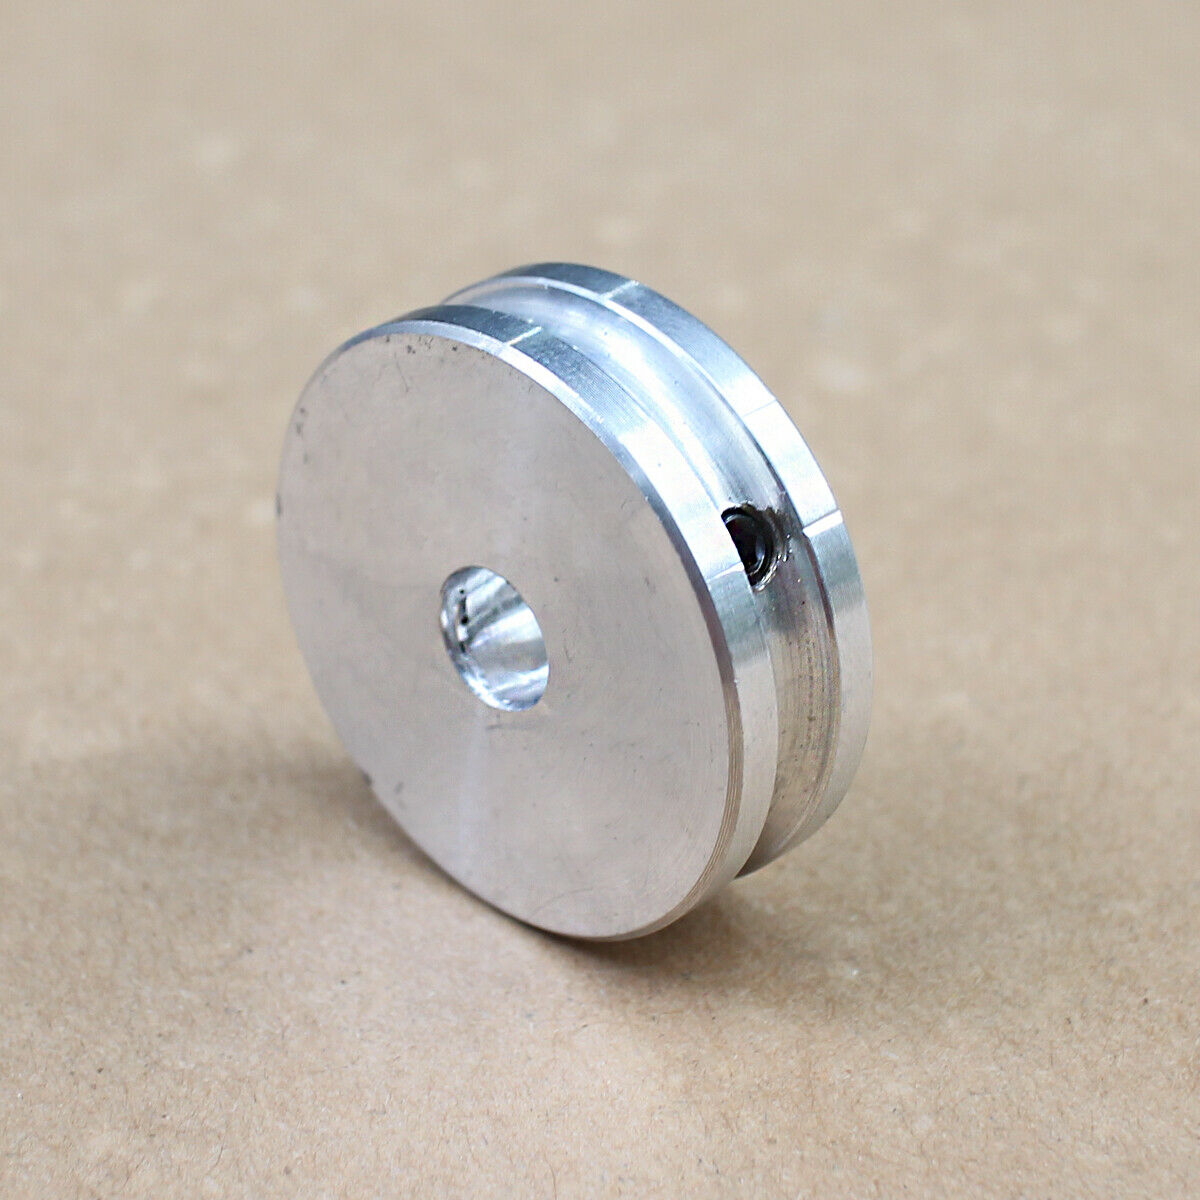 OD 30mm Bore 12mm V-Groove Flat Pulley